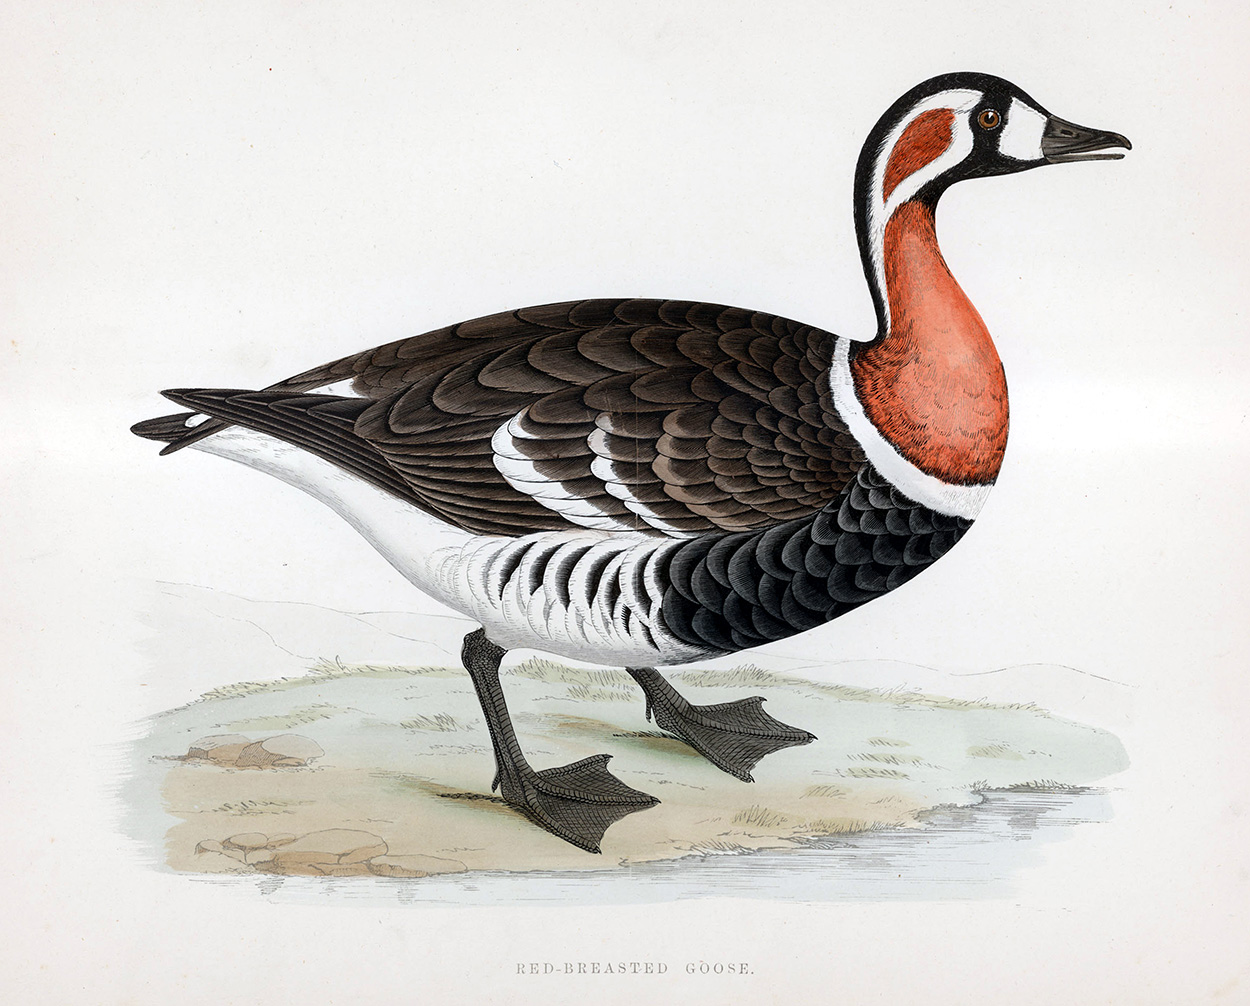 Red Breasted Goose - hand coloured lithograph 1891 (Print) art by Beverley R Morris Art at The Illustration Art Gallery